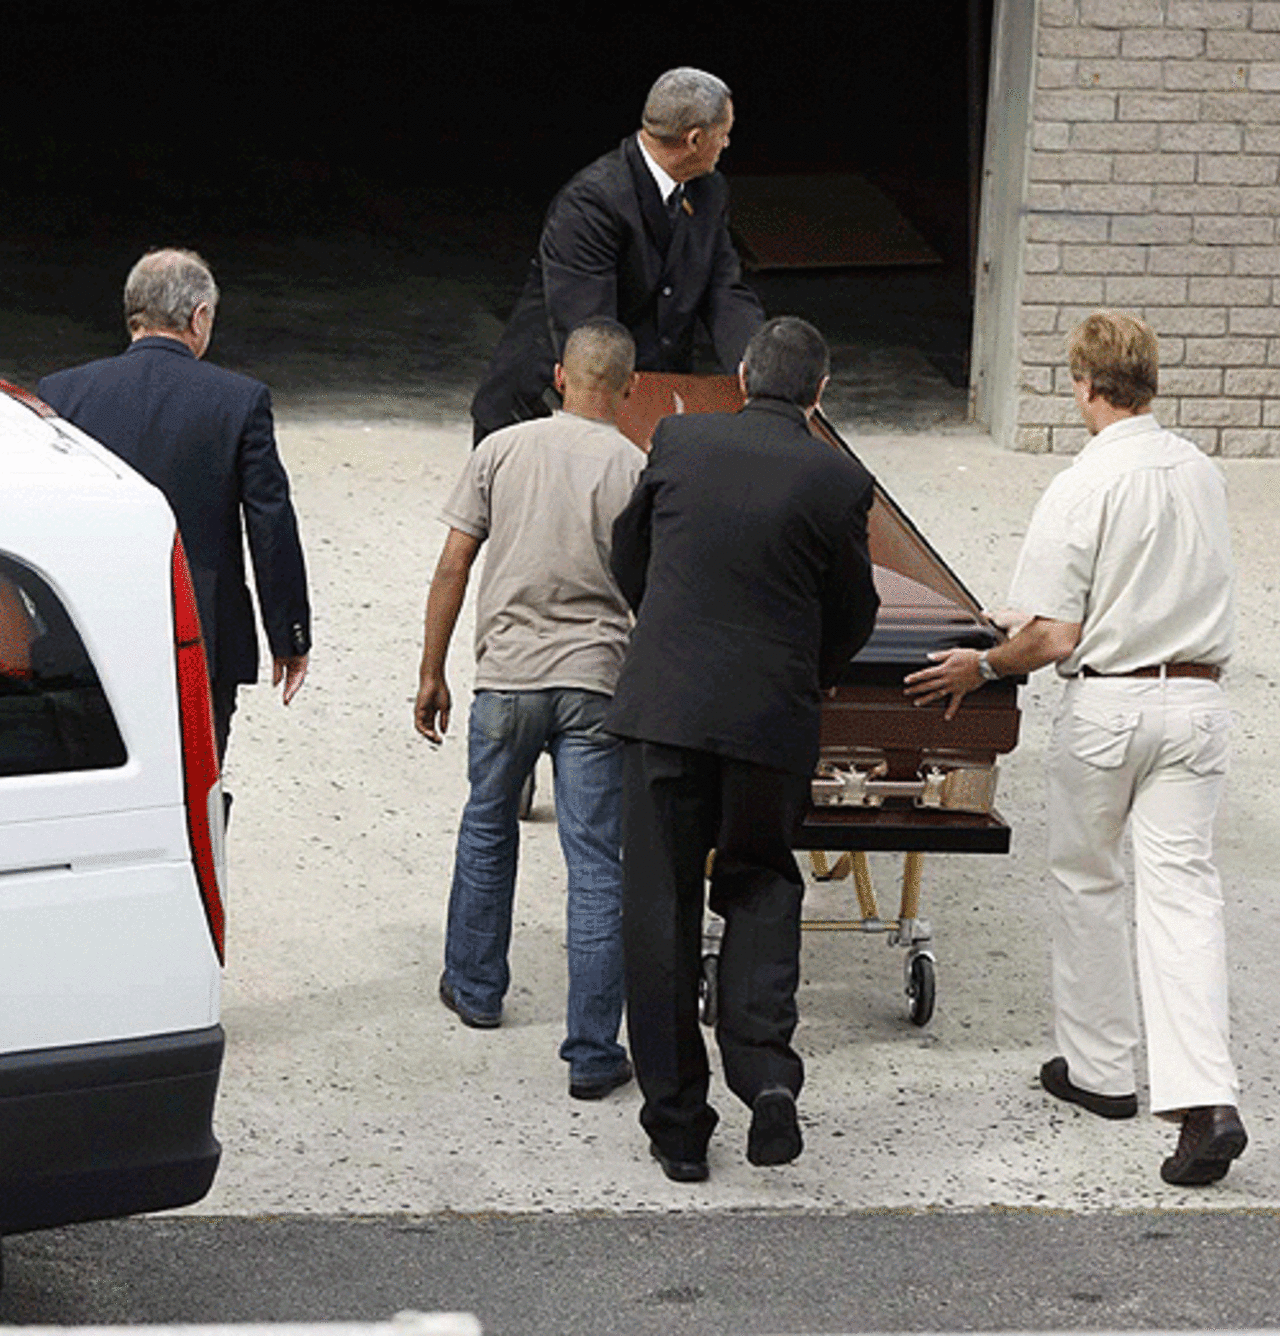 Workers unload the casket containing Bob Woolmer's body at Cape Town International airport, April 29, 2007